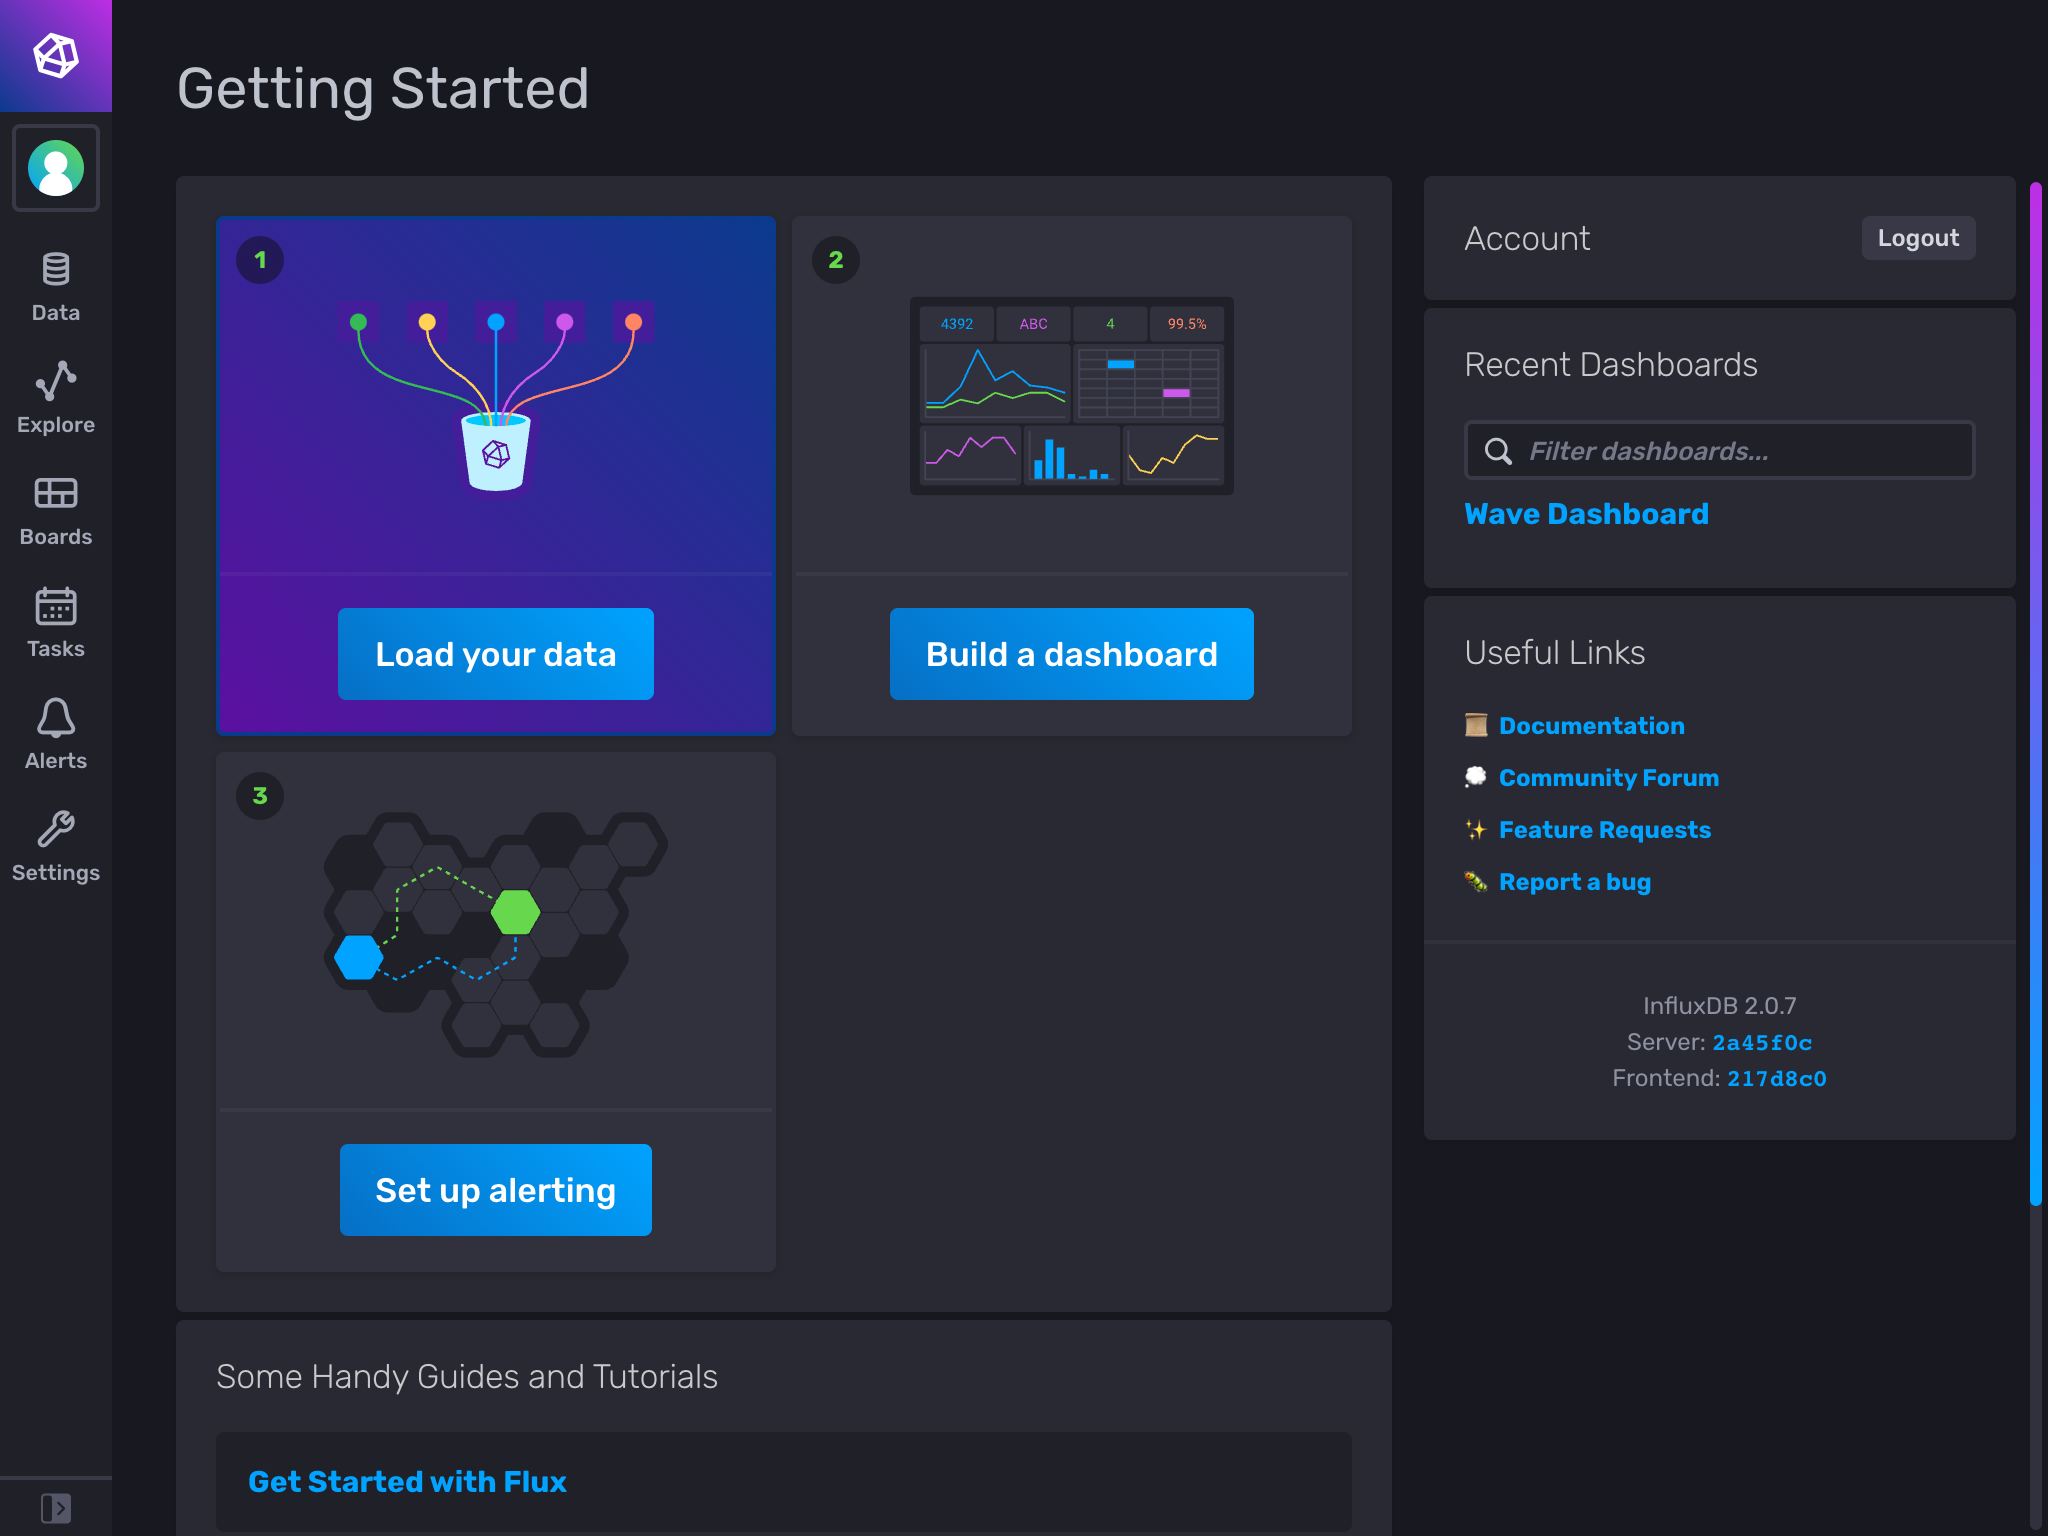 Influx "Getting Started" page, Le